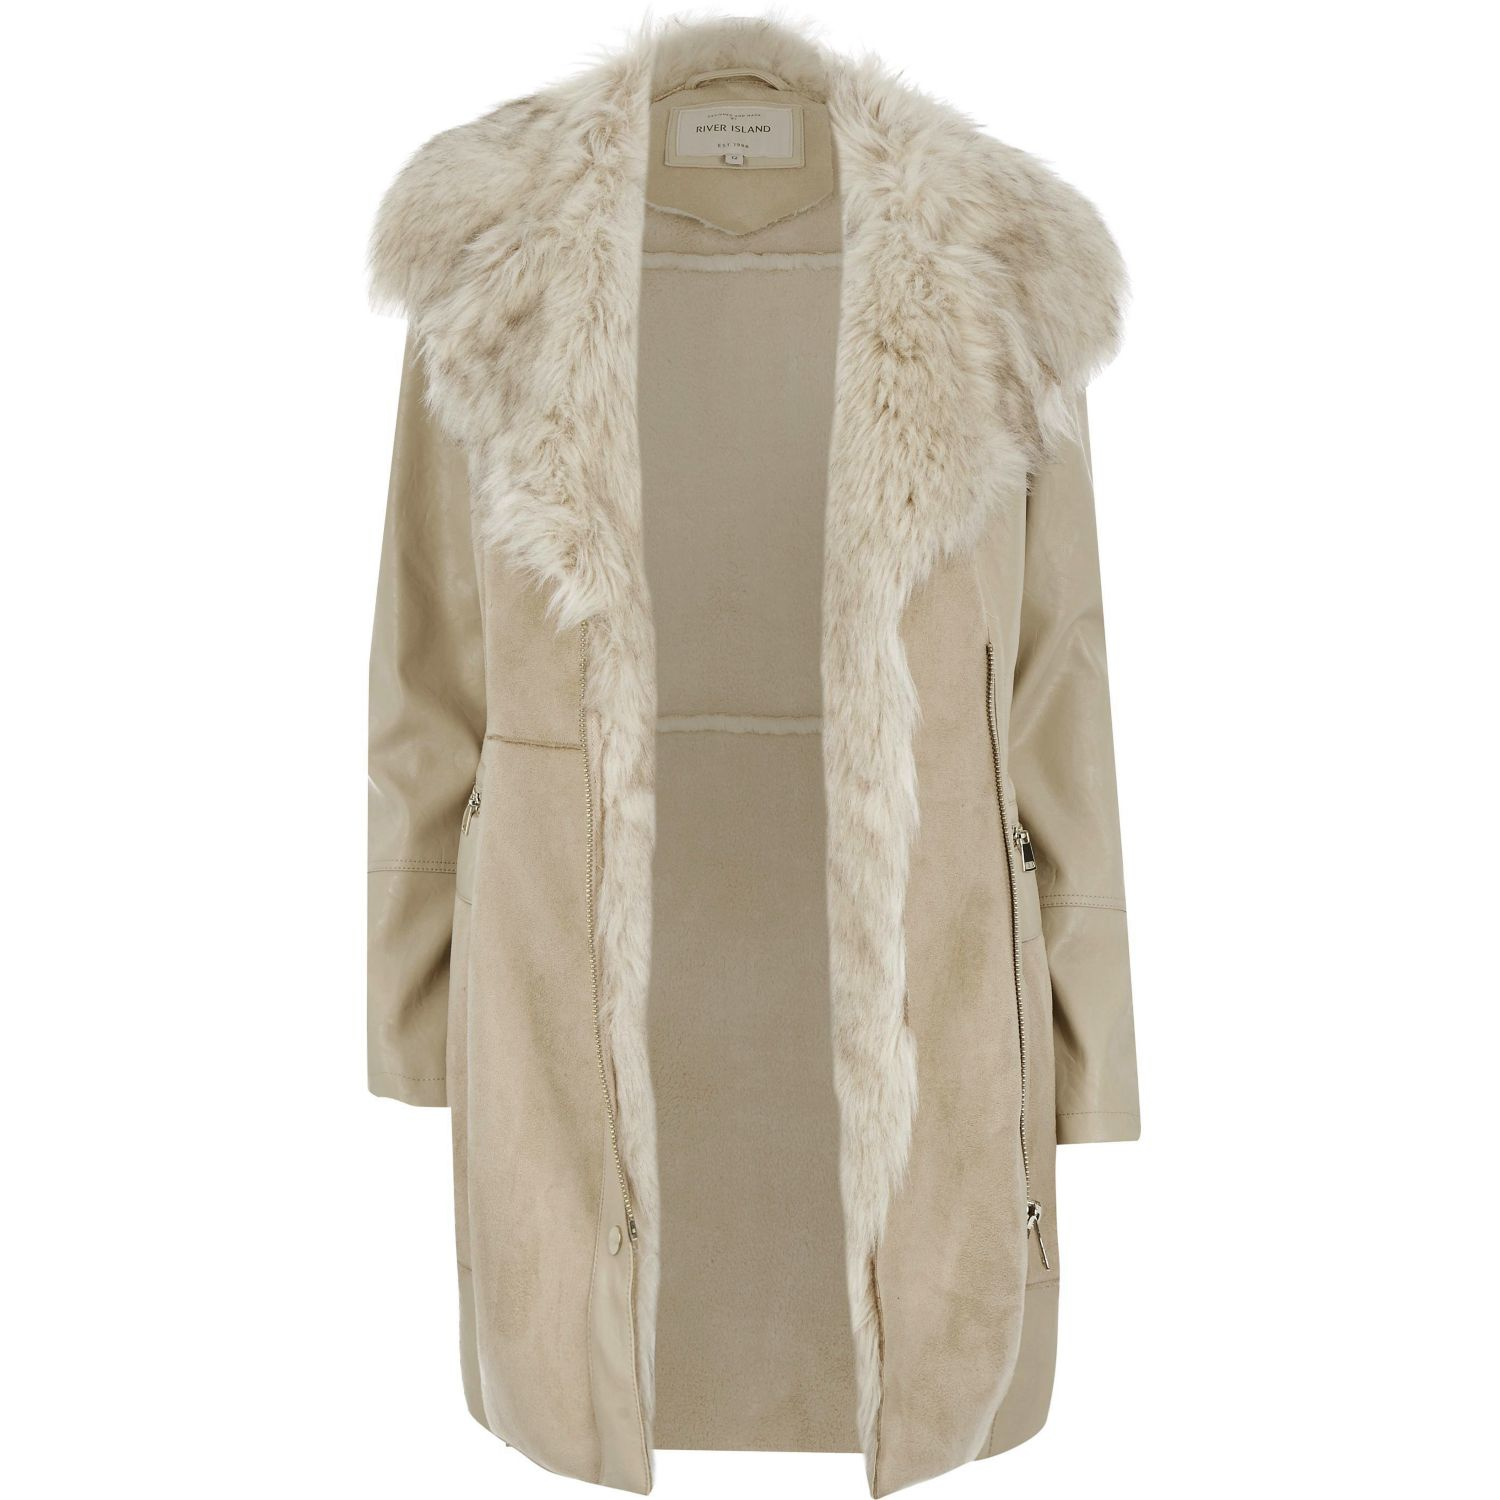 River island Cream Faux Suede Winter Coat in Natural | Lyst